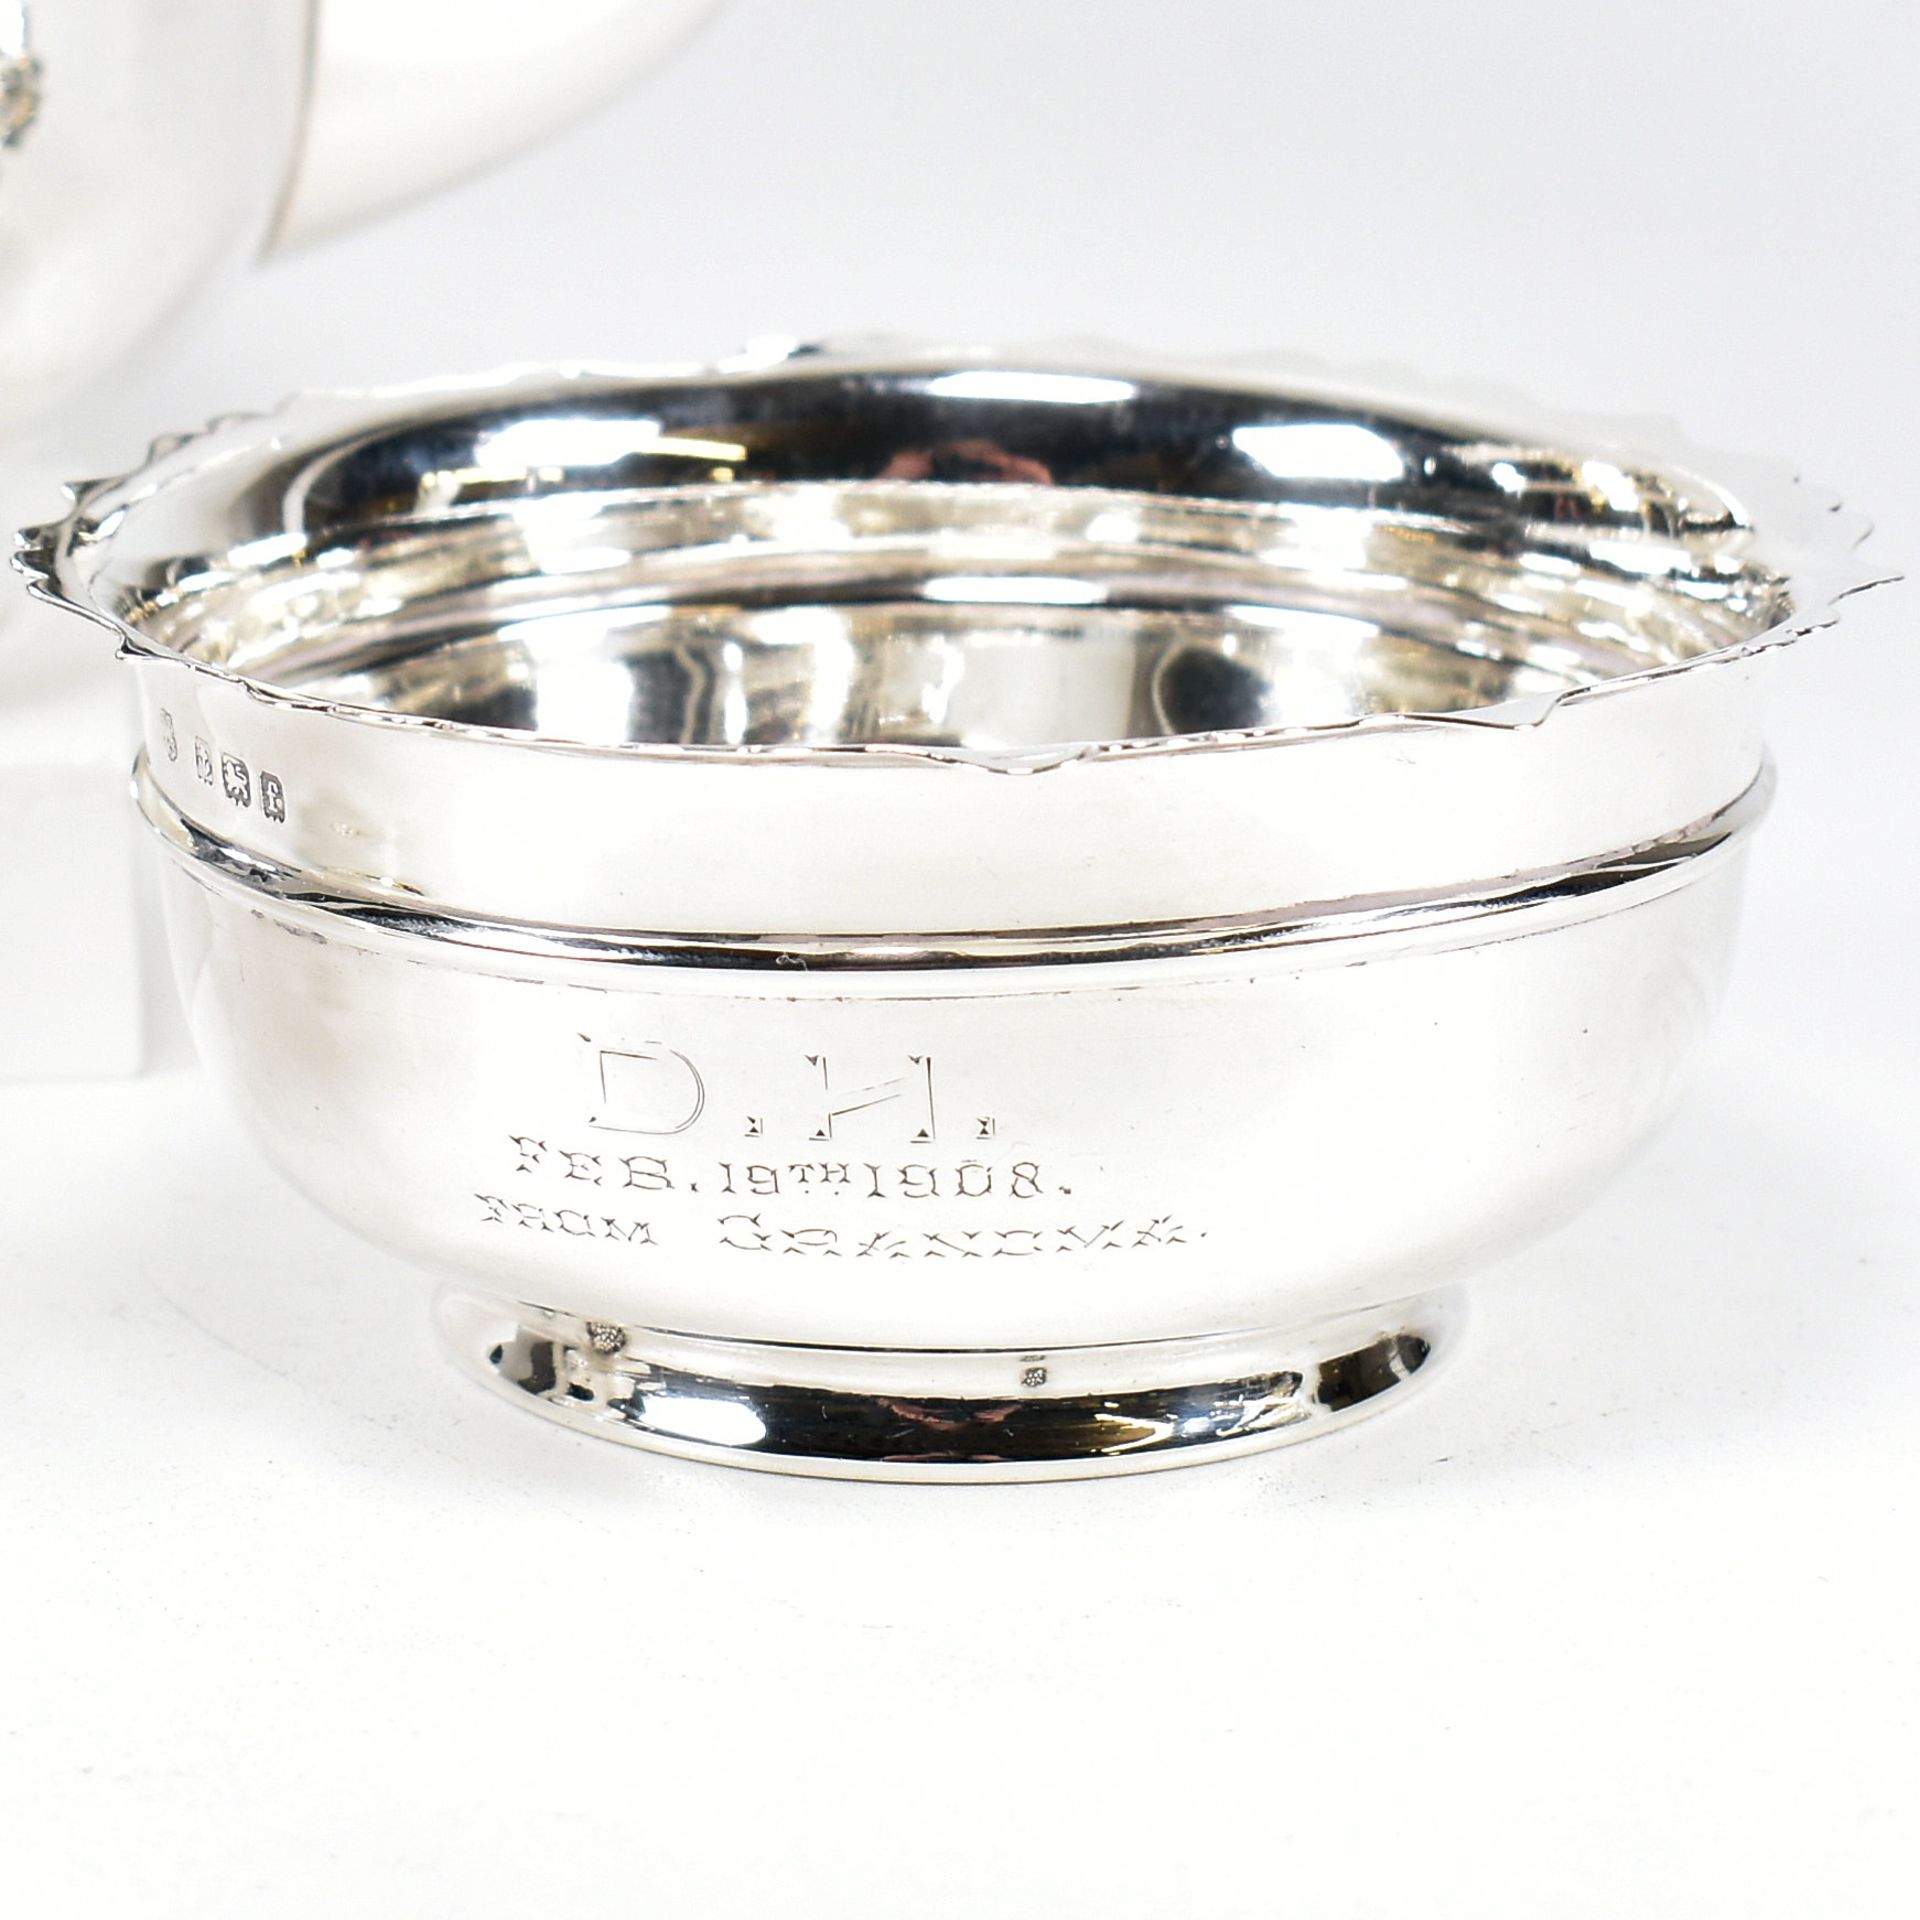 EARLY 20TH CENTURY HALLMARKED SILVER TEA SERVICE - Image 3 of 9